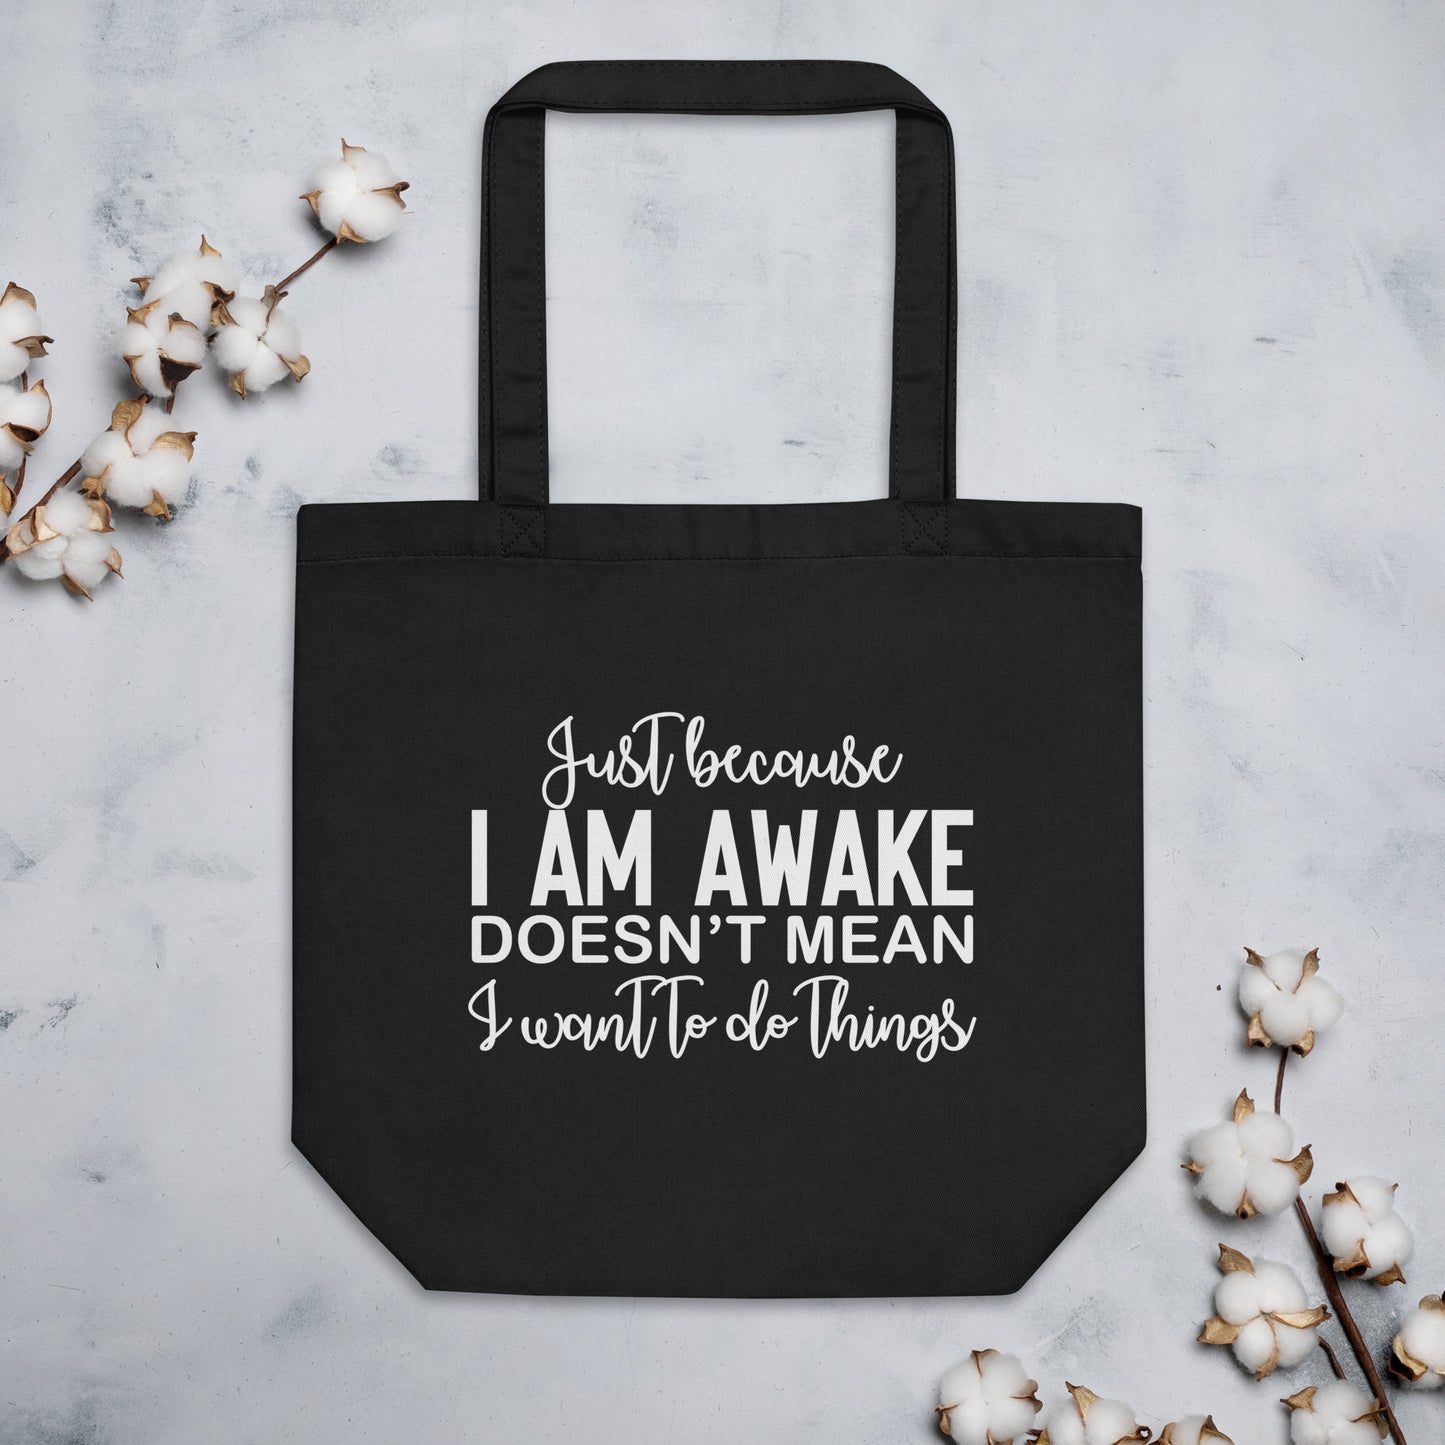 Just Because I Am Awake Doesn't Mean I Want to Do Things Eco Tote Bag